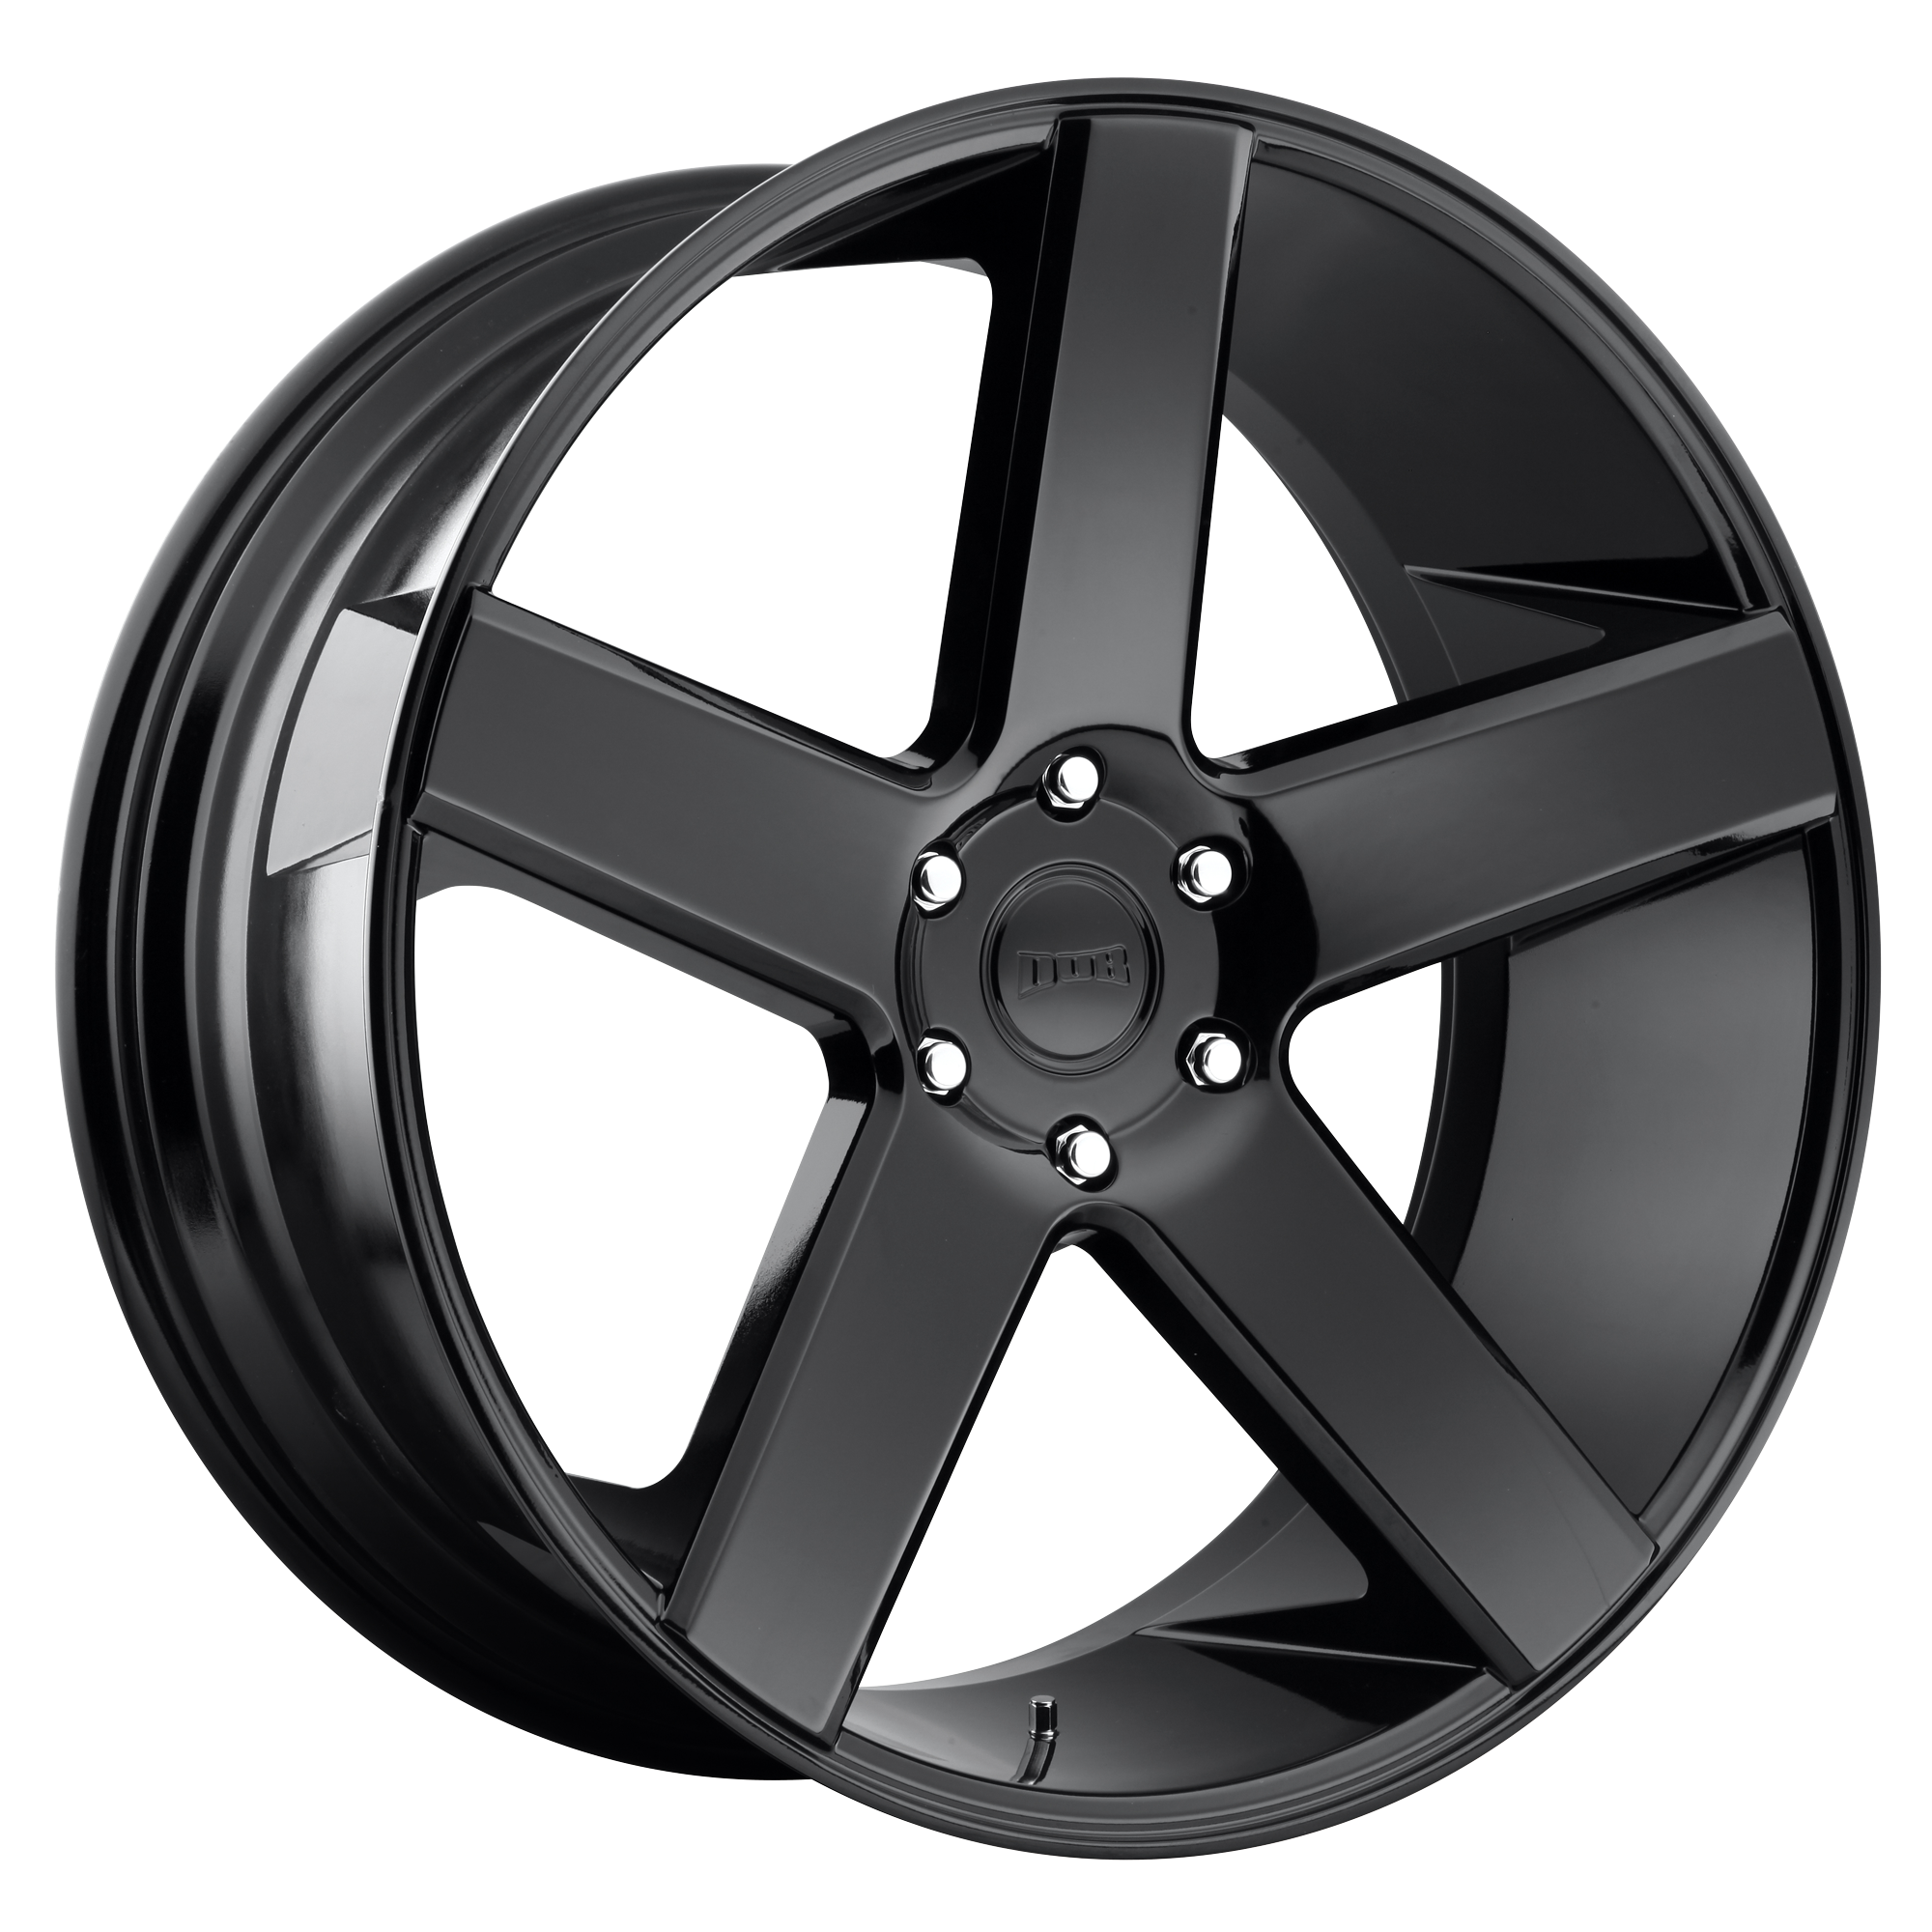 BALLER 28x10 5x115.00 GLOSS BLACK (13 mm) - Tires and Engine Performance